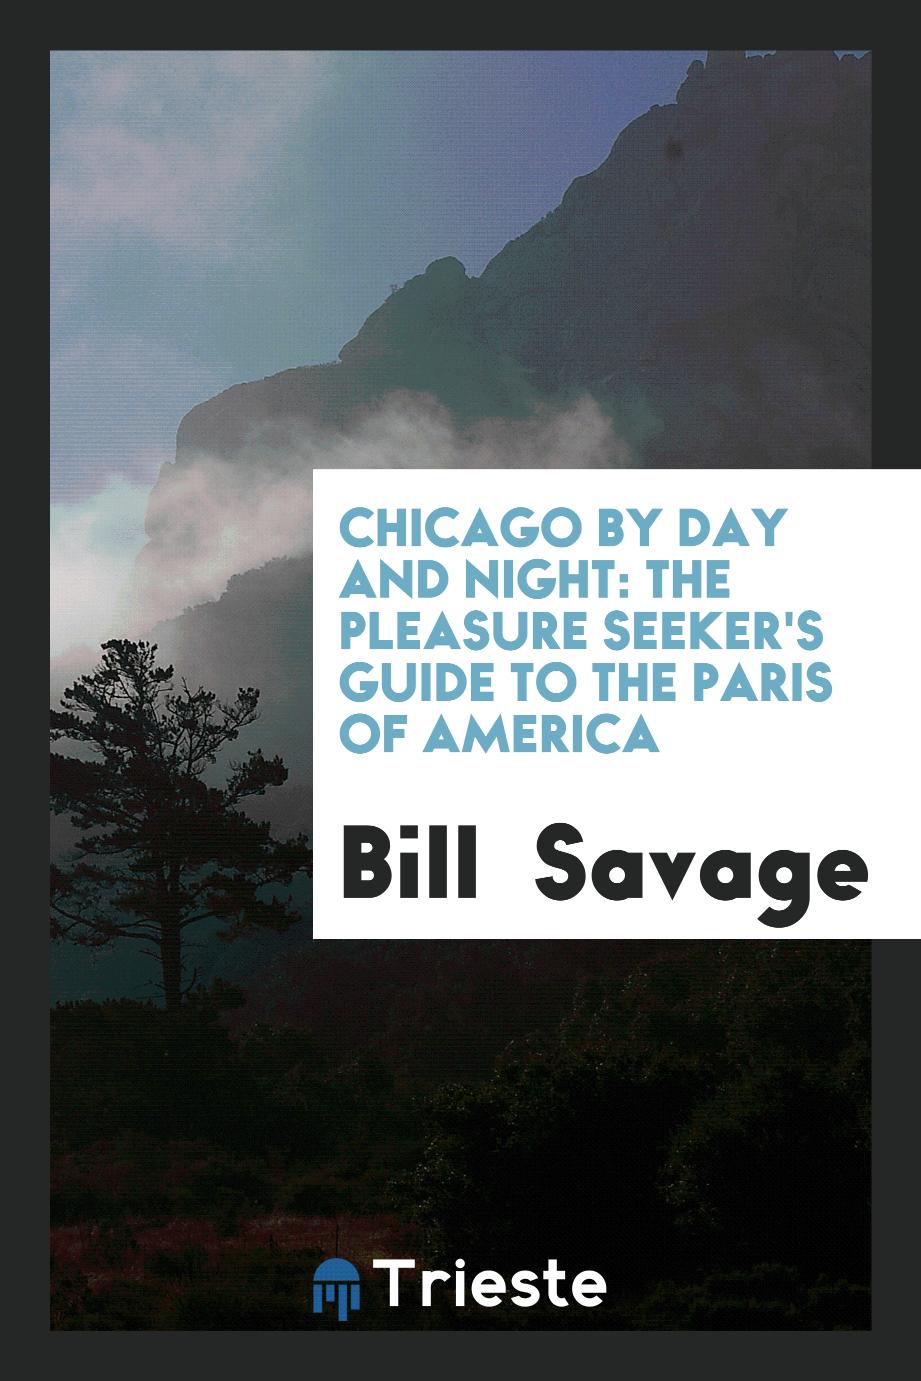 Chicago by day and night: the pleasure seeker's guide to the Paris of America